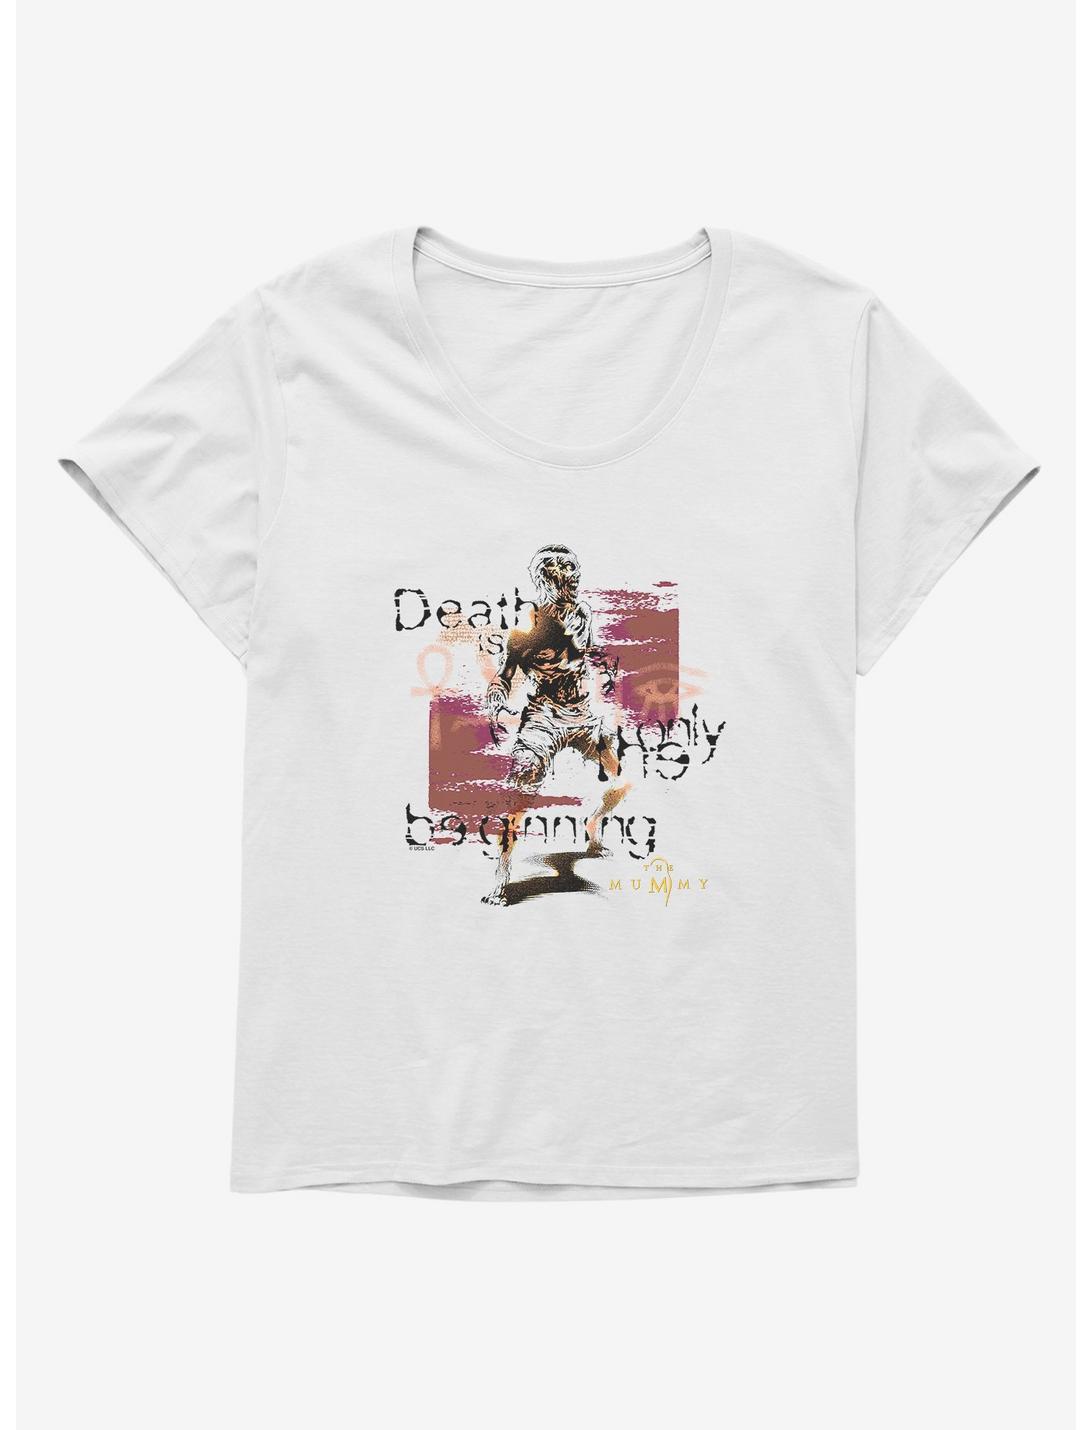 The Mummy Death Is Only The Beginning Girls T-Shirt Plus Size, WHITE, hi-res